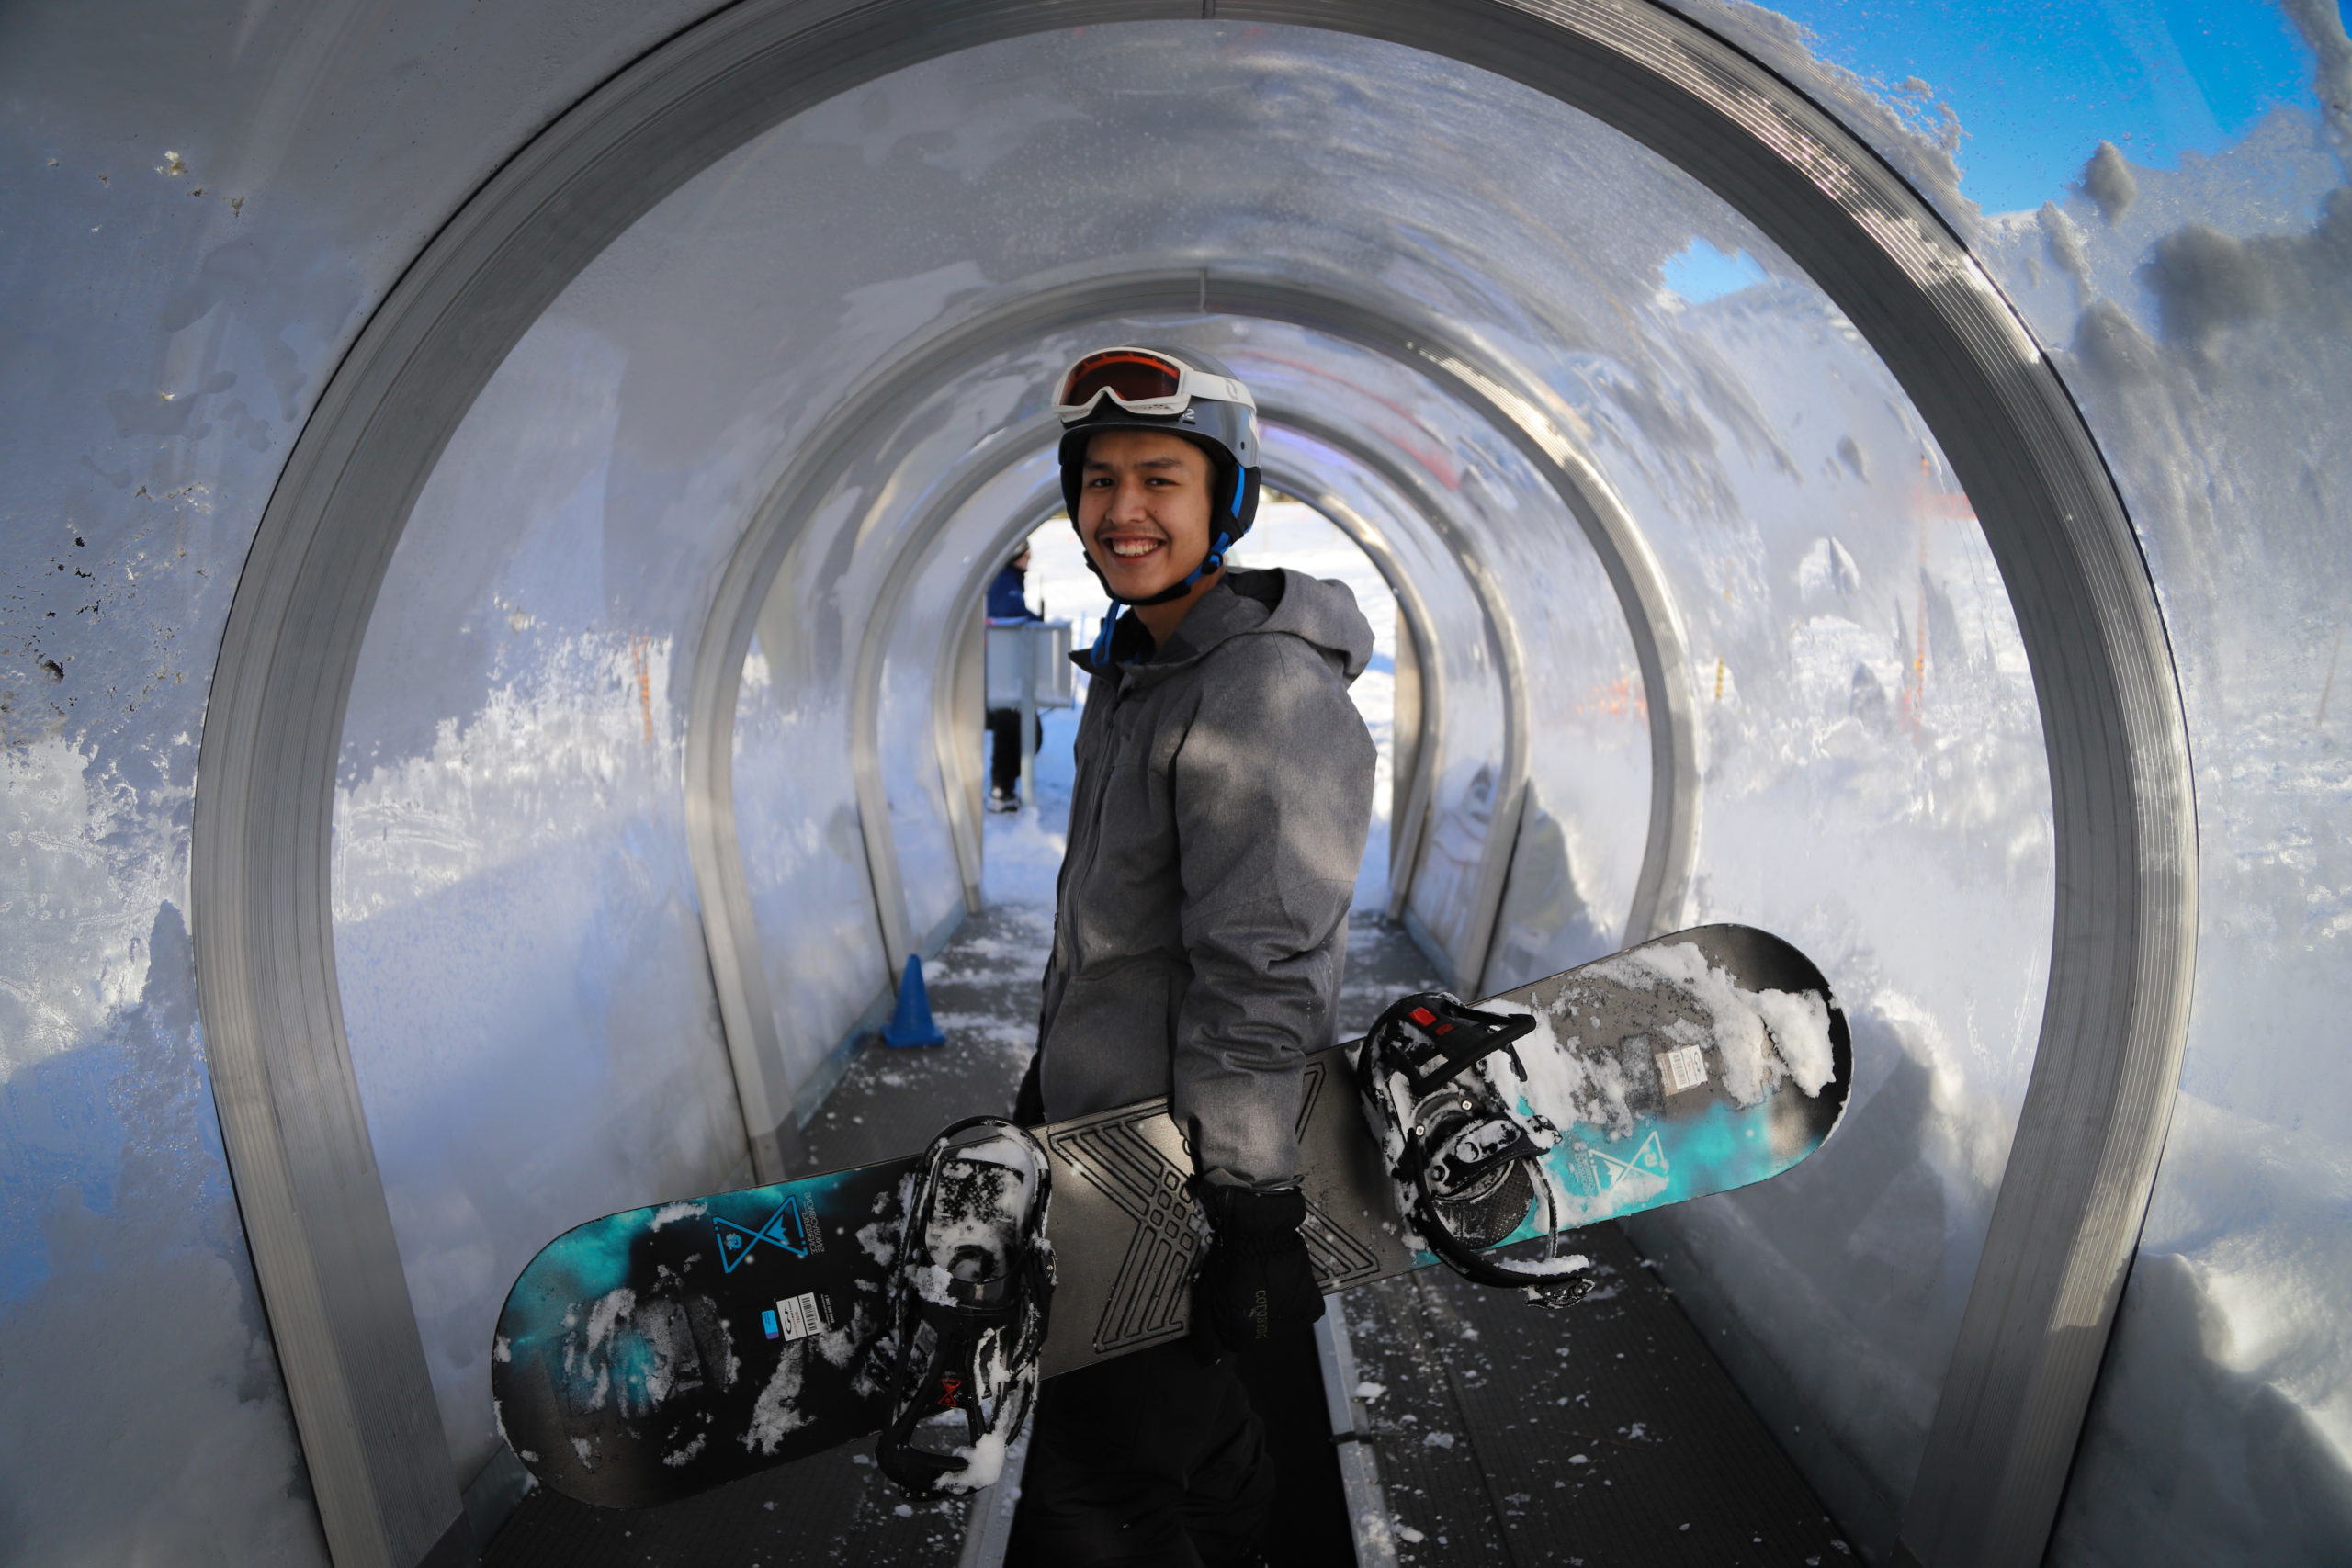 A photograph of a young Indigenous man. He is holding a snowboard and grinning widely